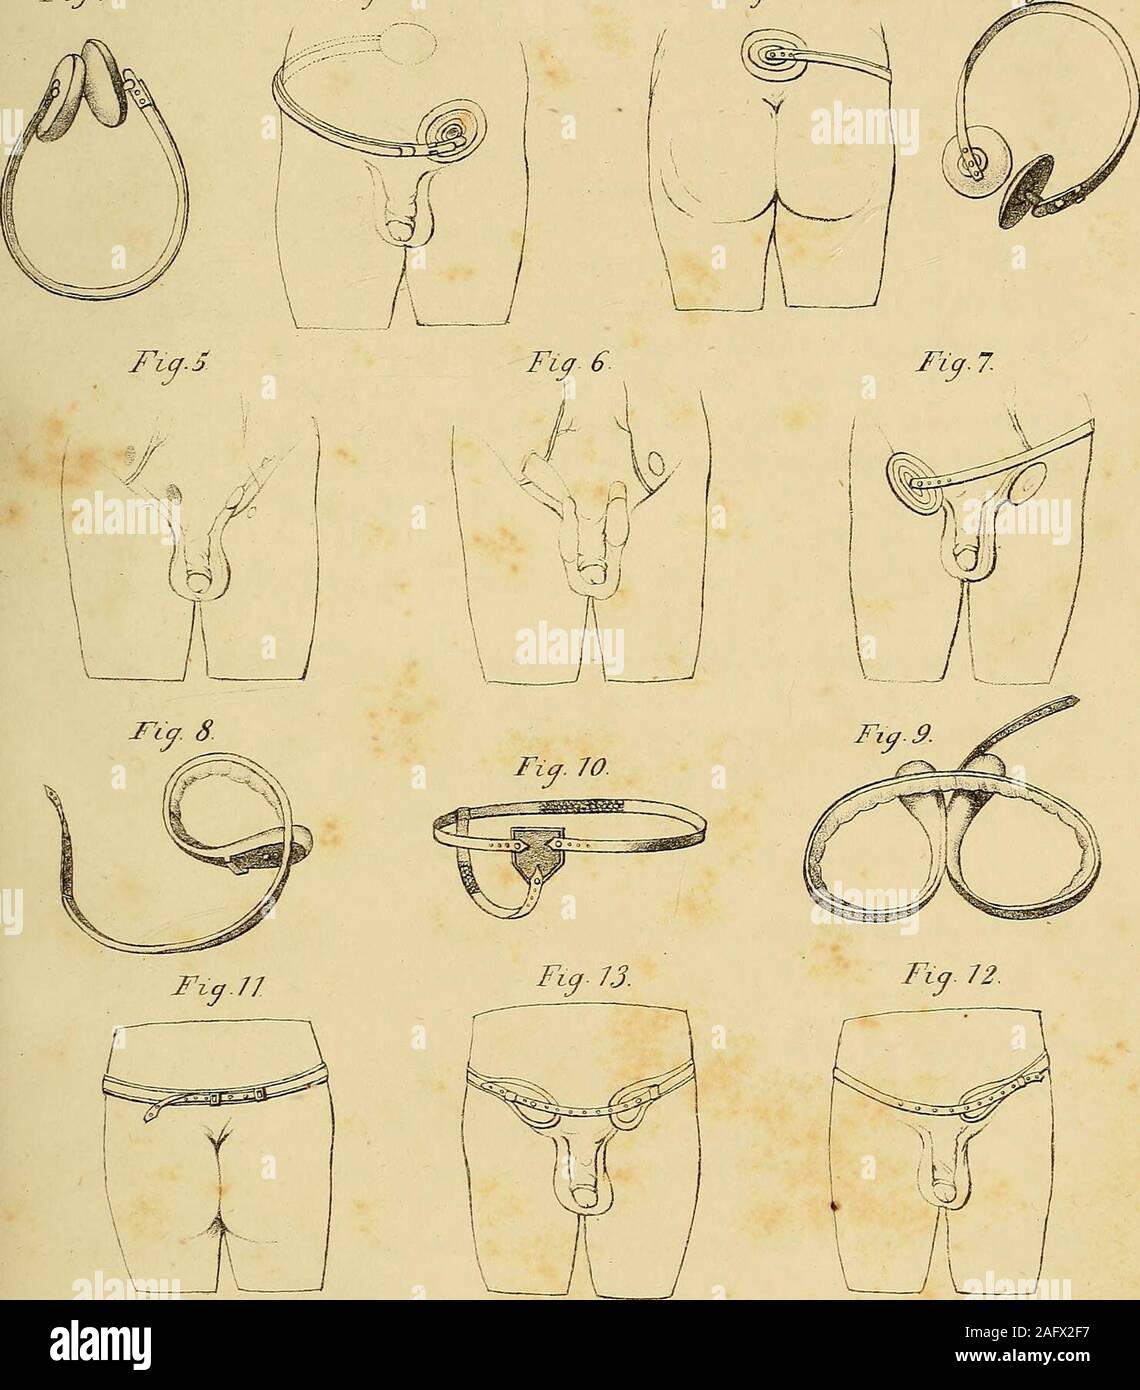 . The anatomy and surgical treatment of abdominal hernia. e lower part of the spine is shown. In this truss nocircular or thigh strap are required. Fig. 4. Salmon and Odys truss divested of its covering to show its balland socket apparatus, and the contrivance by which thespring can be lengthened or shortened at pleasure. Fig. 5. Represents the two apertures through which an oblique herniadescends, and the situation of the epigastric artery; belowPouparts ligament on the left side, is pointed out the part onwhich a truss should be applied for a femoral hernia. Fig. 6. Oblique hernia passing th Stock Photo